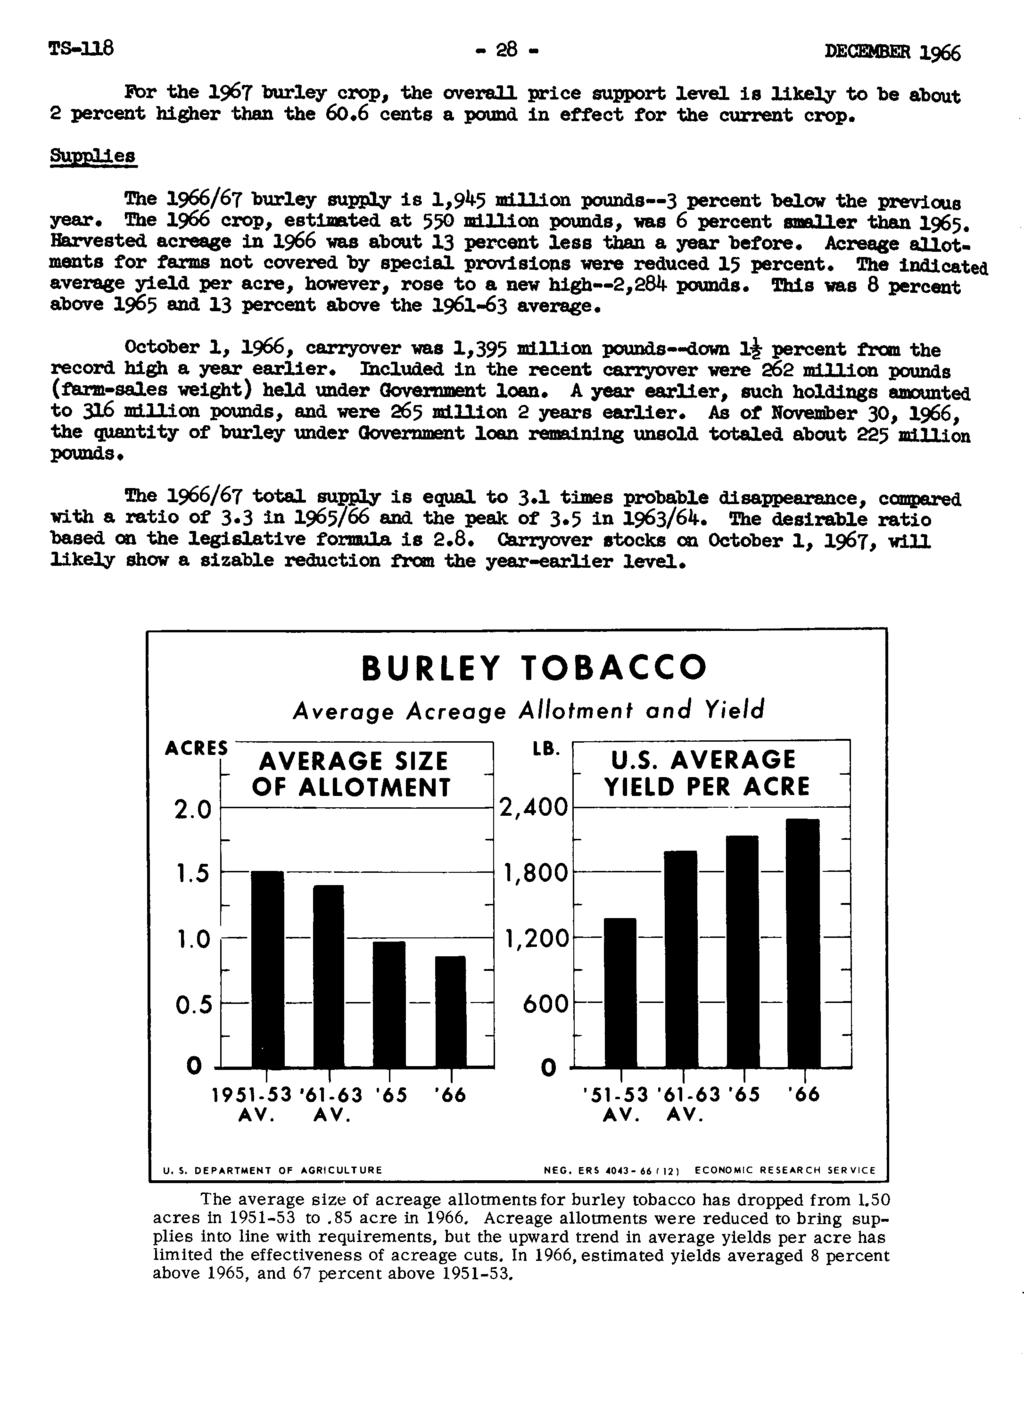 T8-ll8-28- DECEMBER 1966 For the 1967 burley crop, the overall. price support level is likely to be about 2 percent higher than the 6o.6 cents a pound in effect for the current crop.